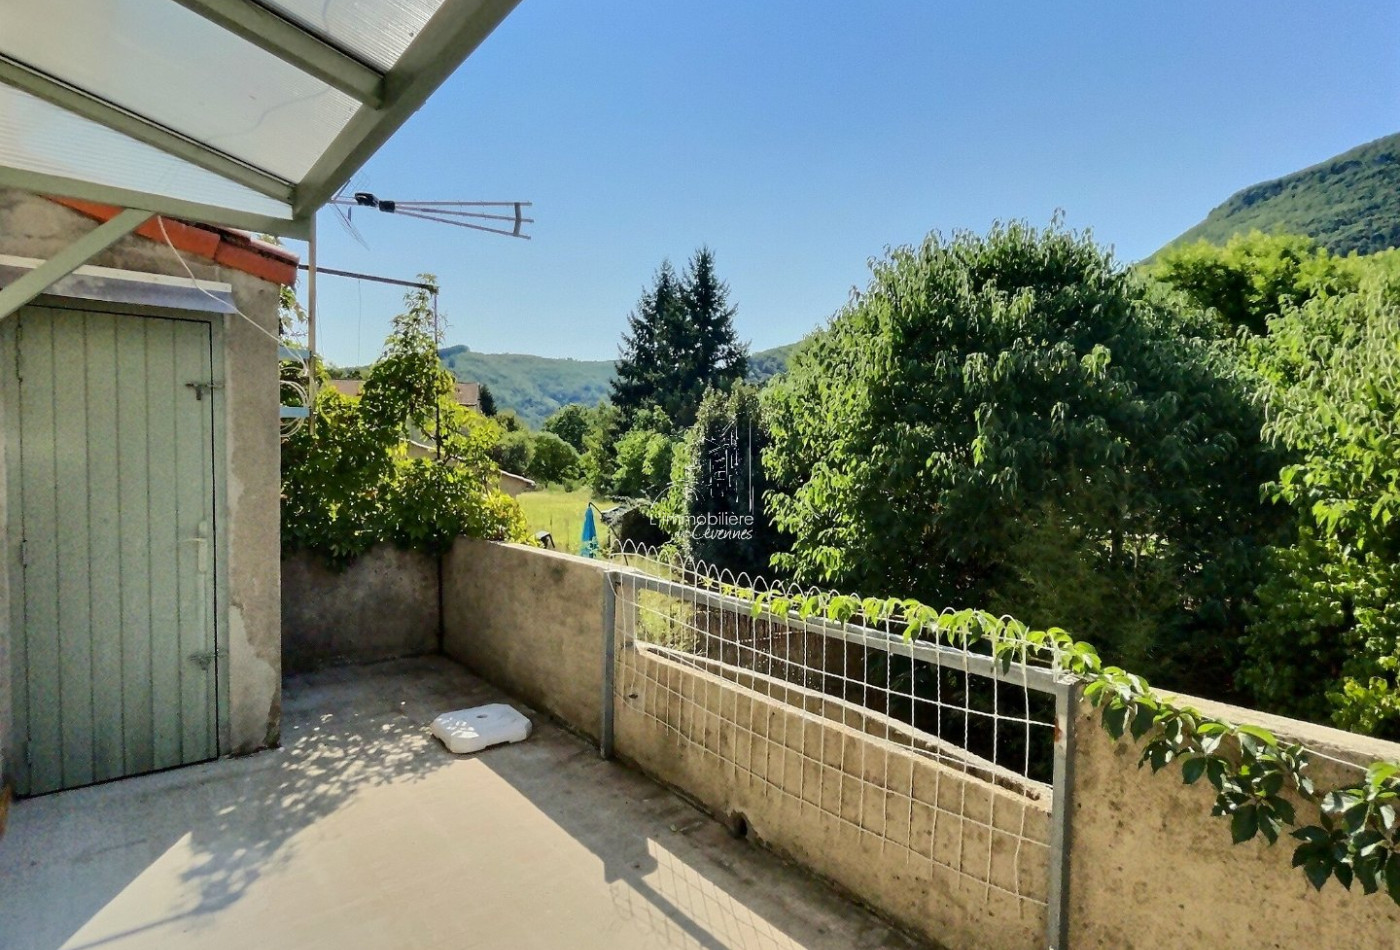 For sale  Molieres Cavaillac | Réf 340292521 - Immo3d